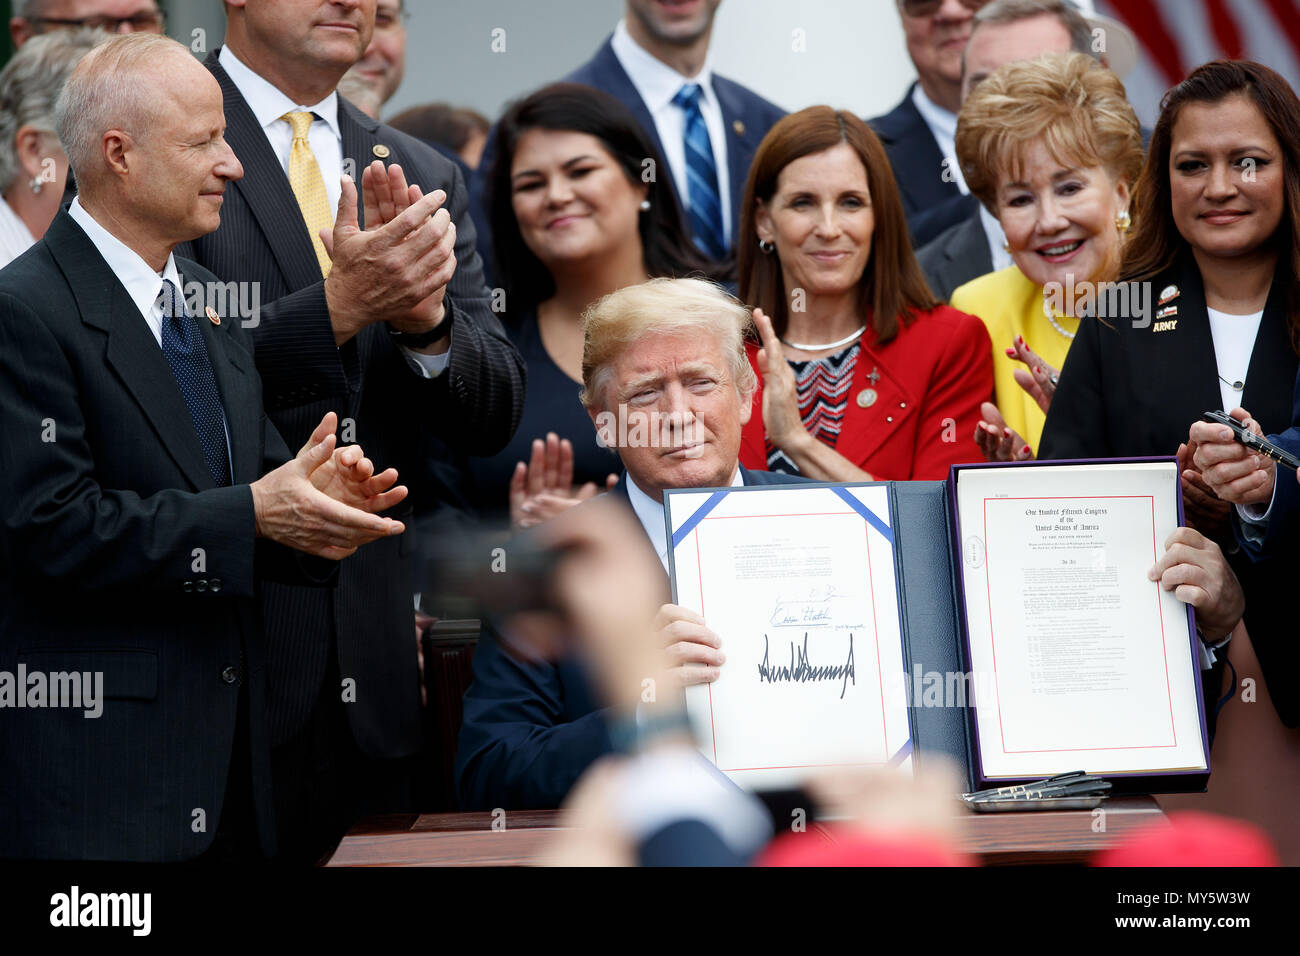 Washington, USA. 6th June, 2018. U.S. President Donald Trump (C) displays his signature during a bill signing ceremony for the 'VA Mission Act of 2018' in the Rose Garden of the White House in Washington, DC, the United States, on June 6, 2018. Credit: Ting Shen/Xinhua/Alamy Live News Stock Photo